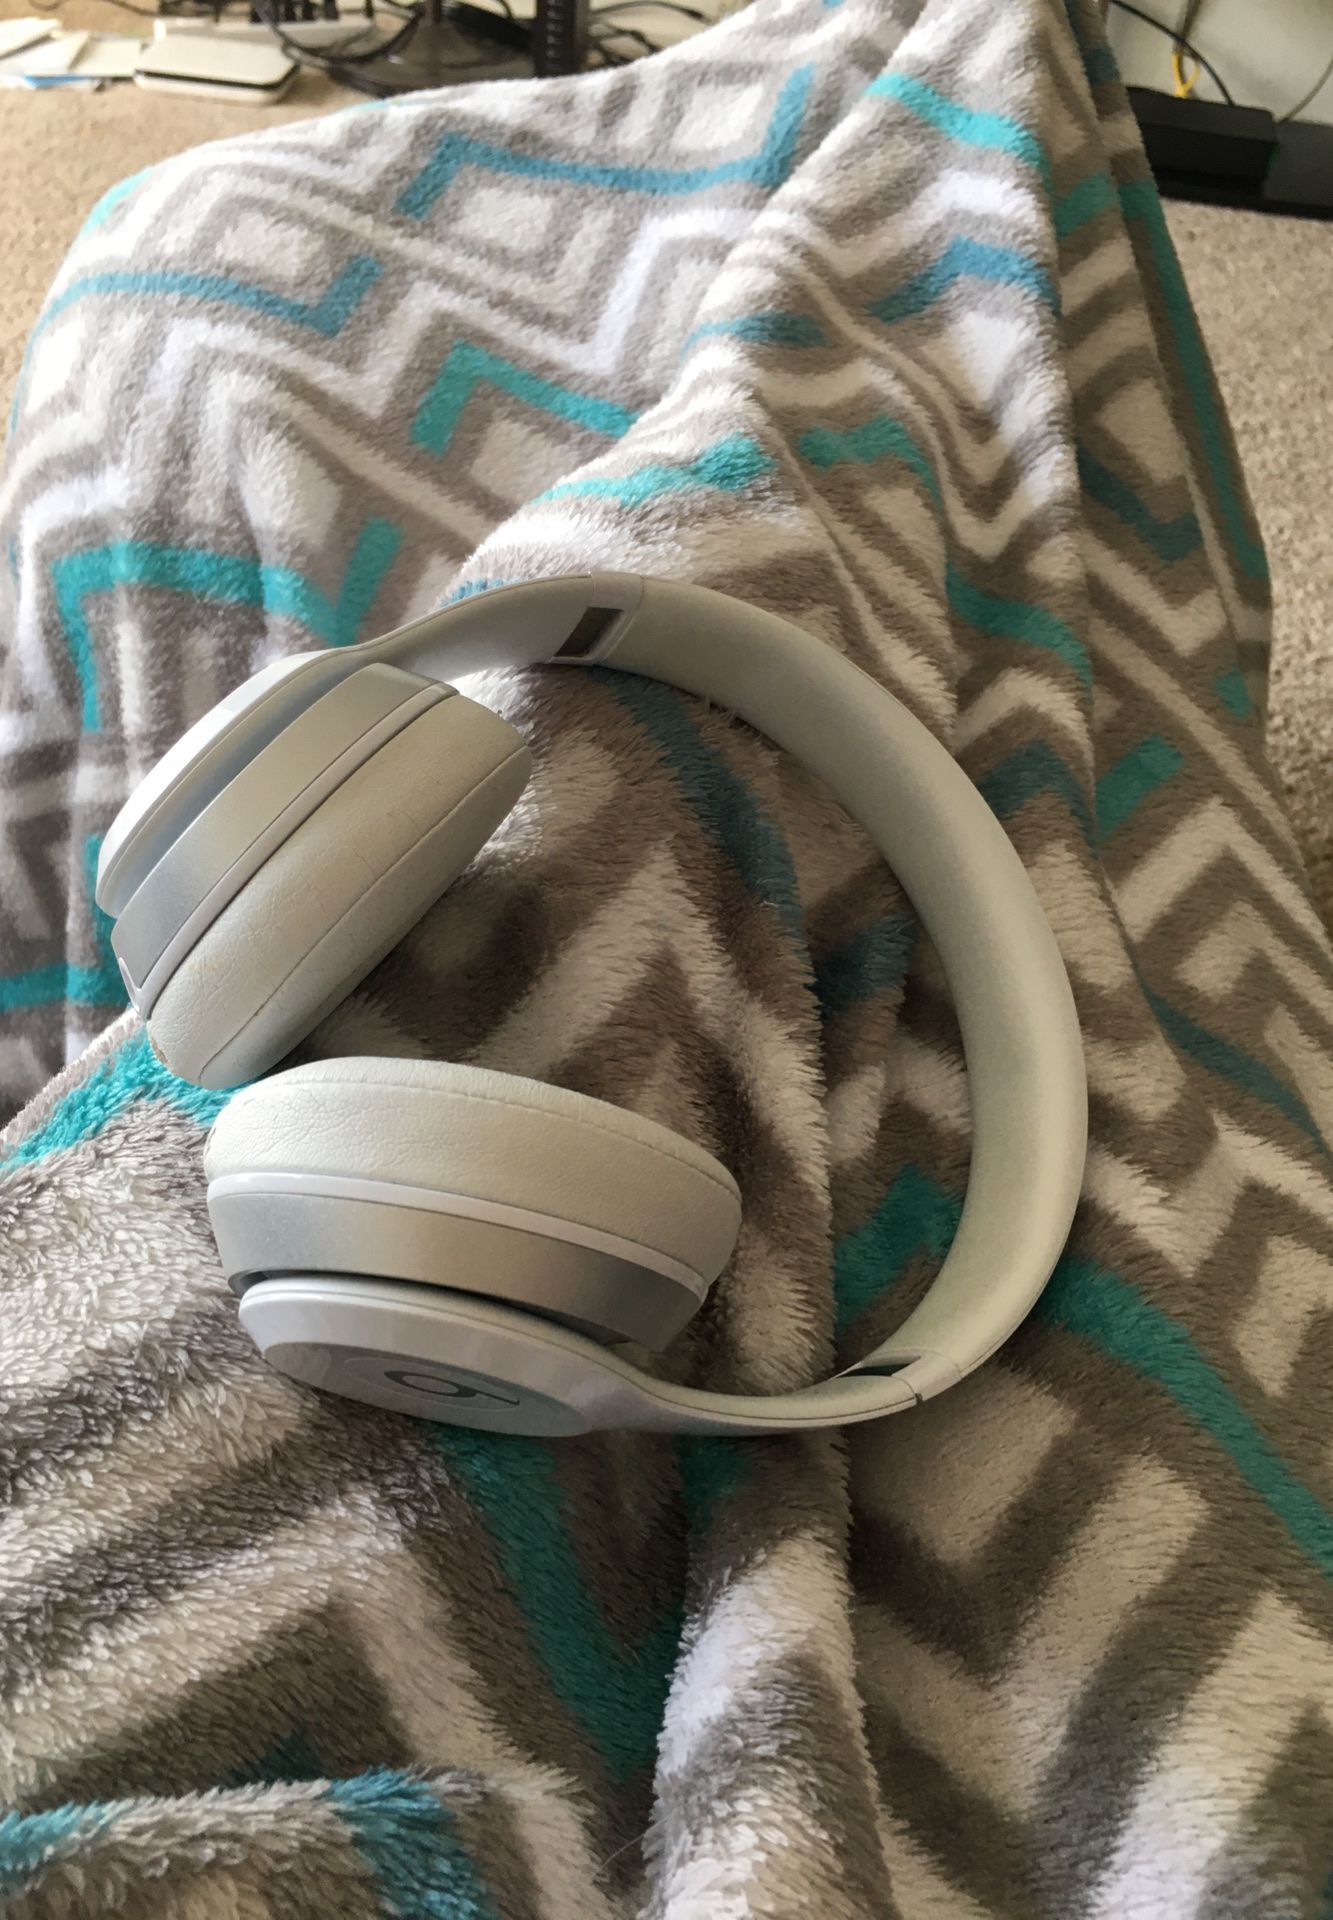 Solo Beats (so fresh and so clean clean !